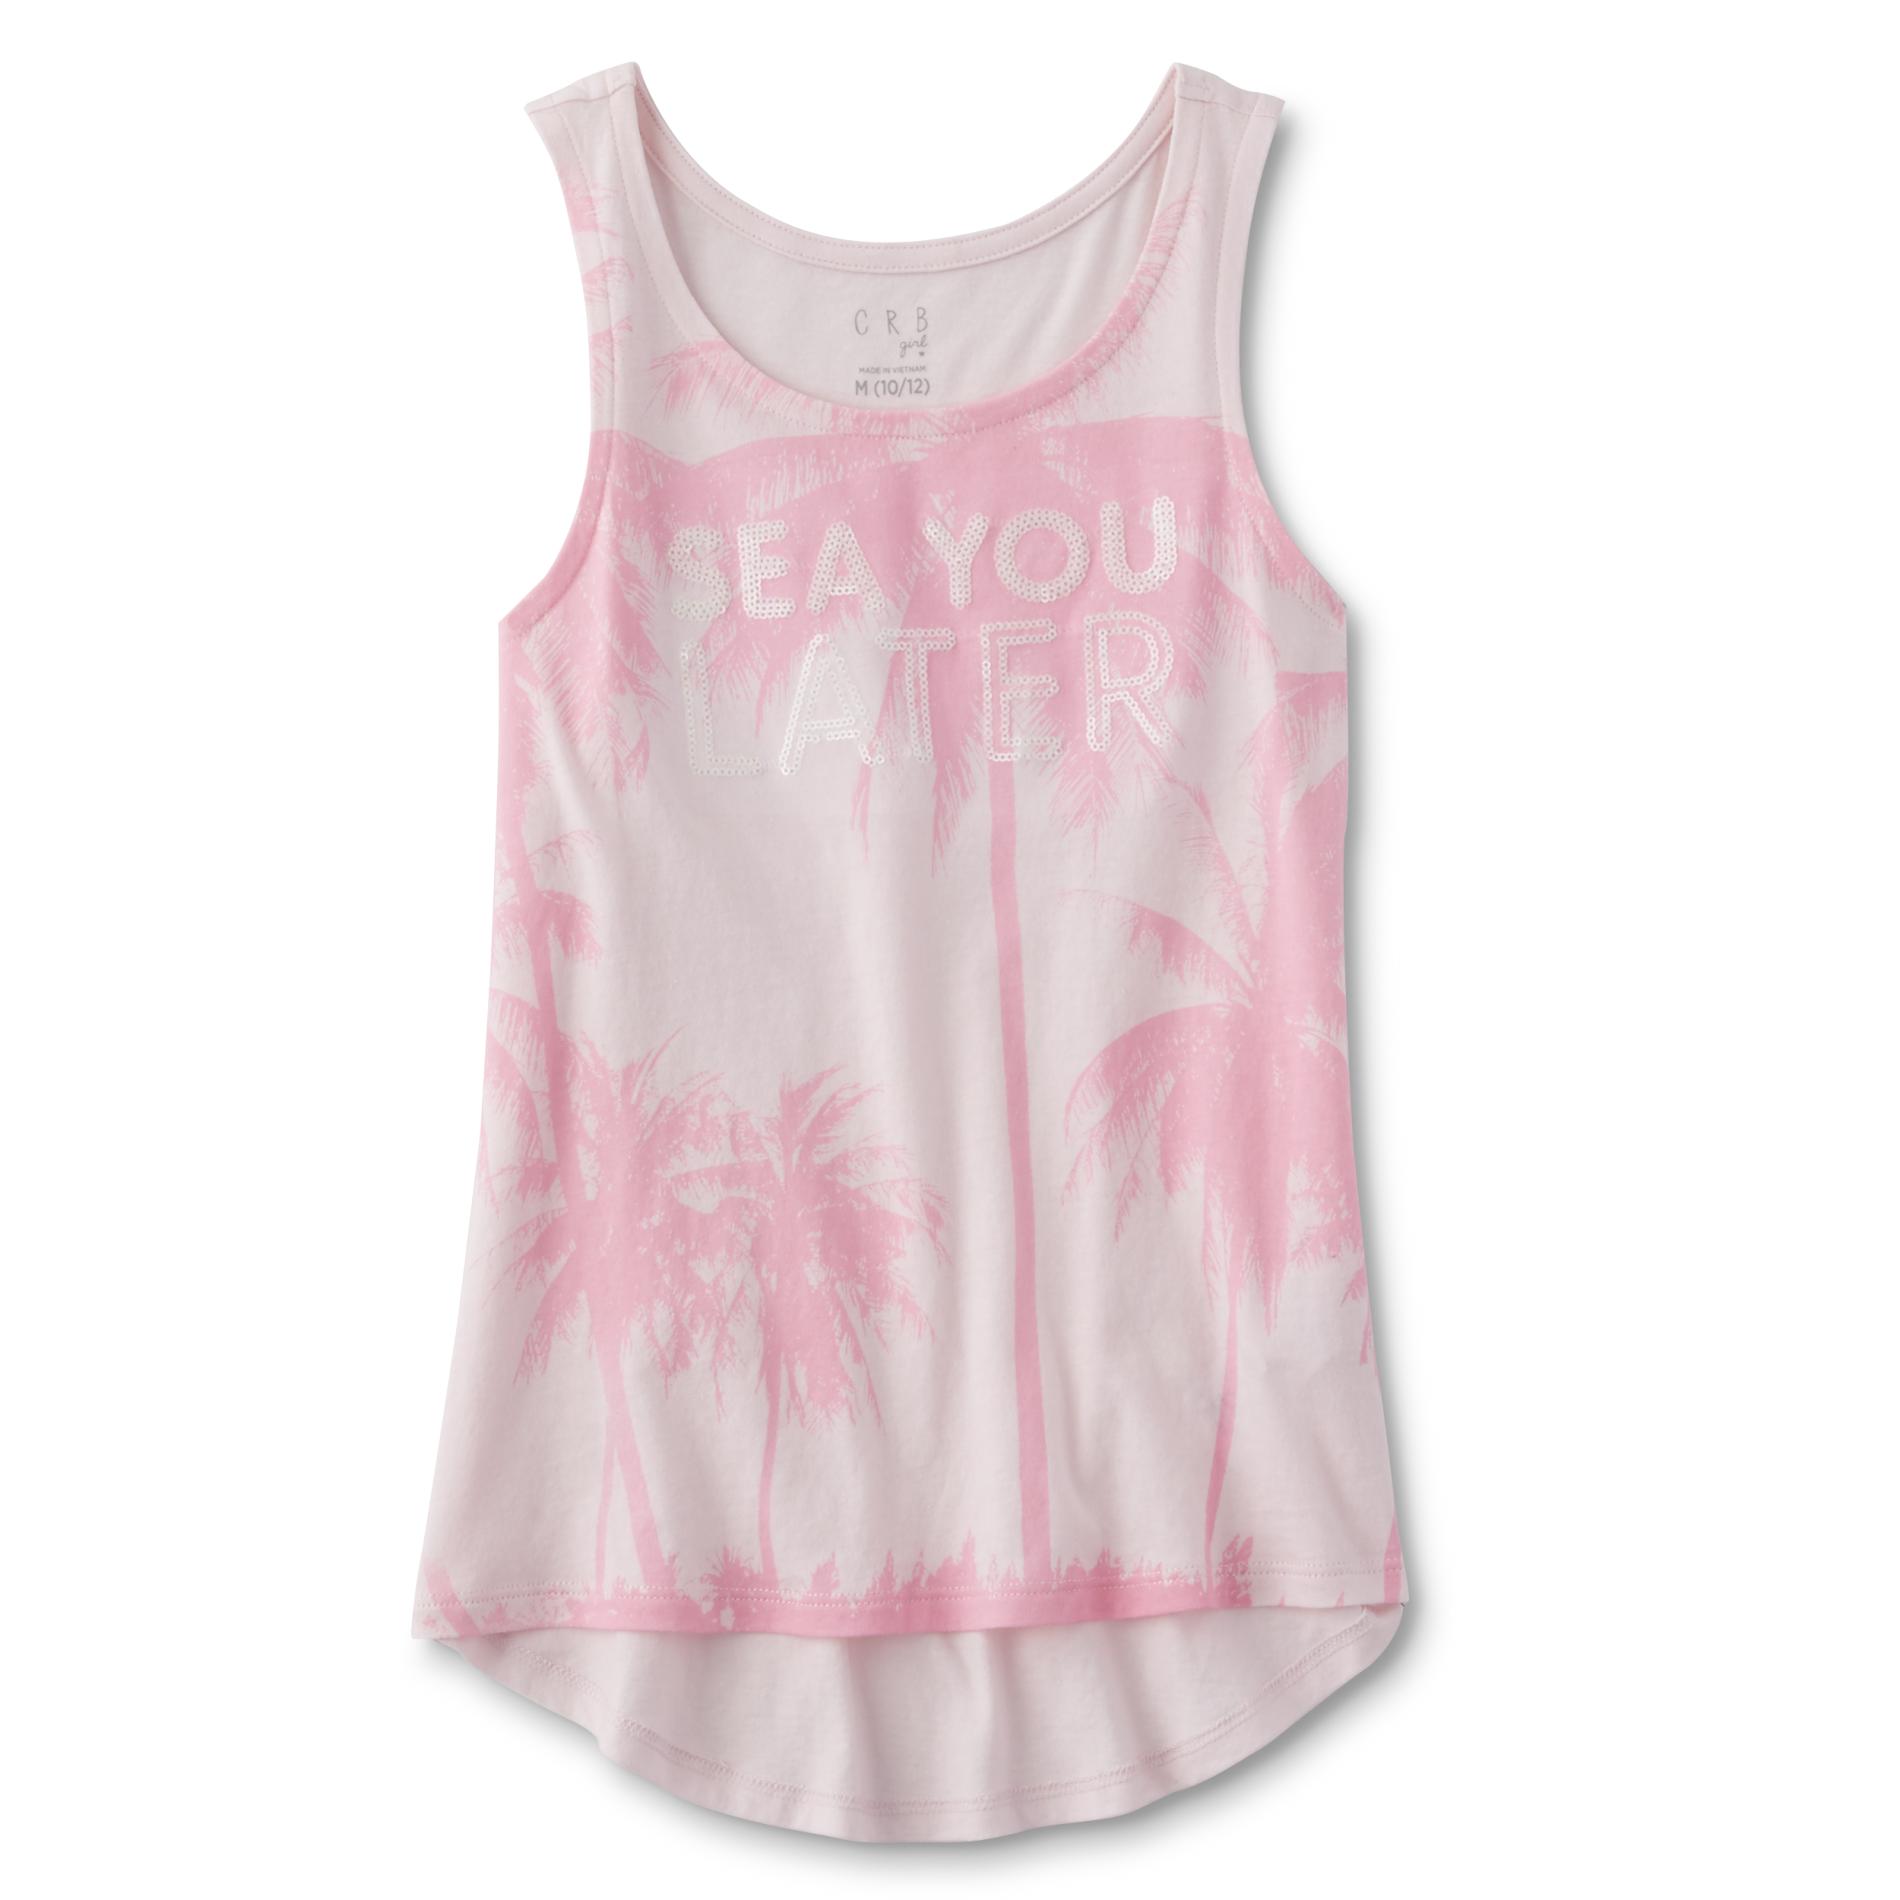 Canyon River Blues Girls' Graphic Tank Top - Sea You Later